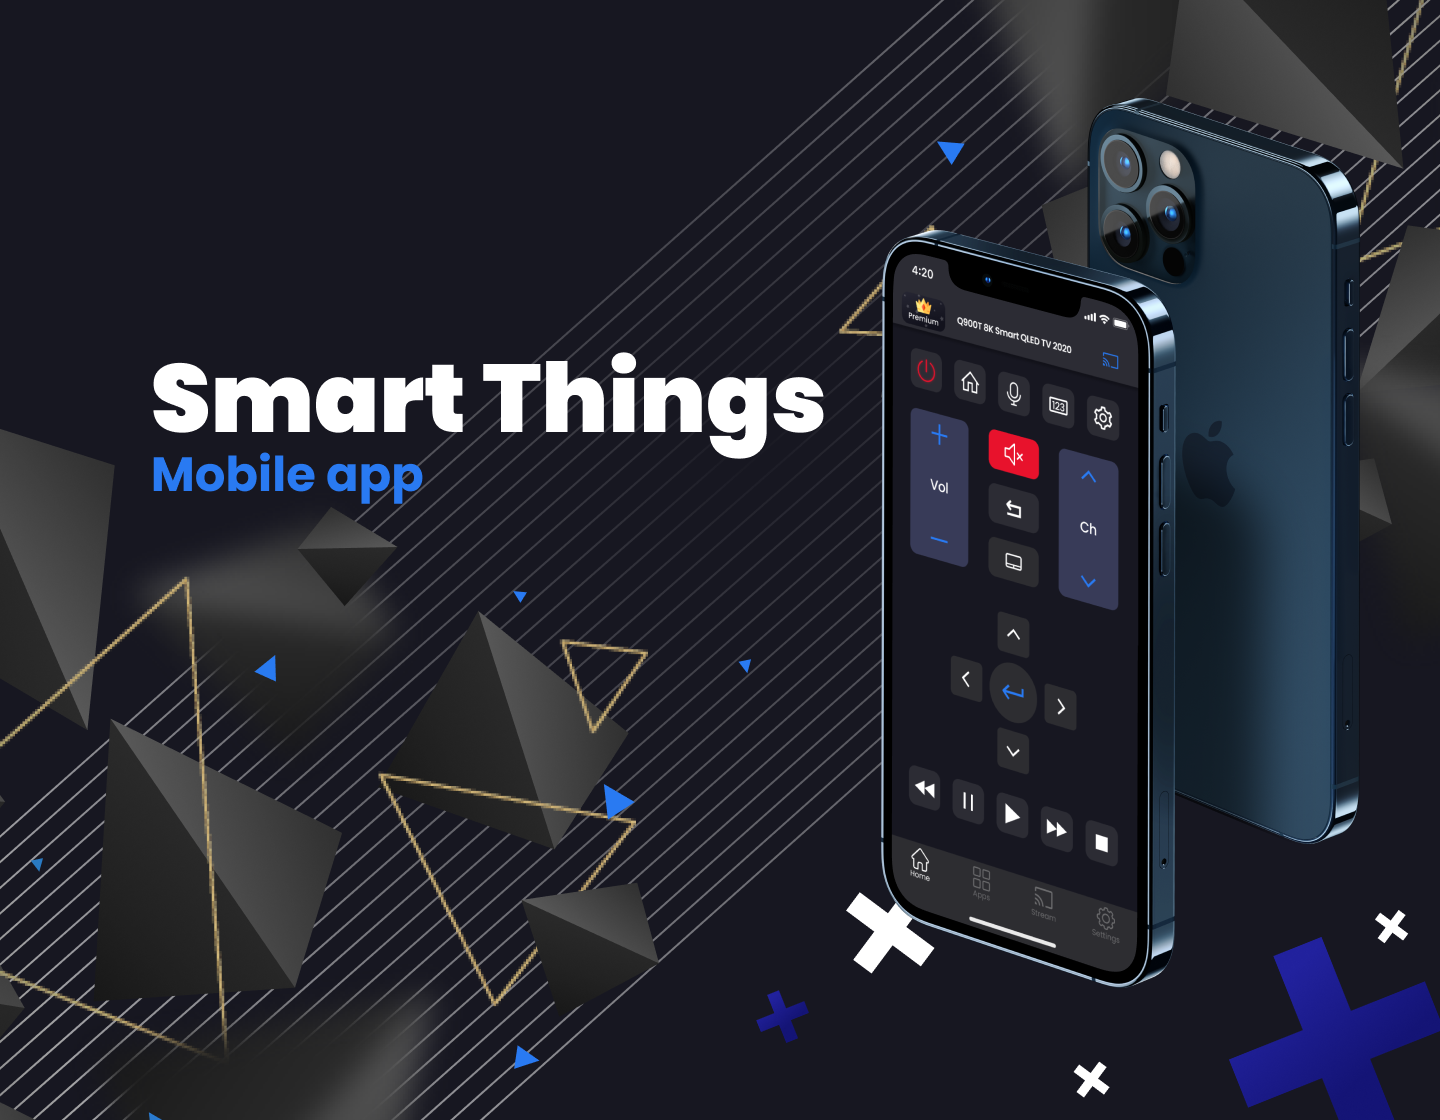 SmartThing mobile app for managing smart devices from a smartphone